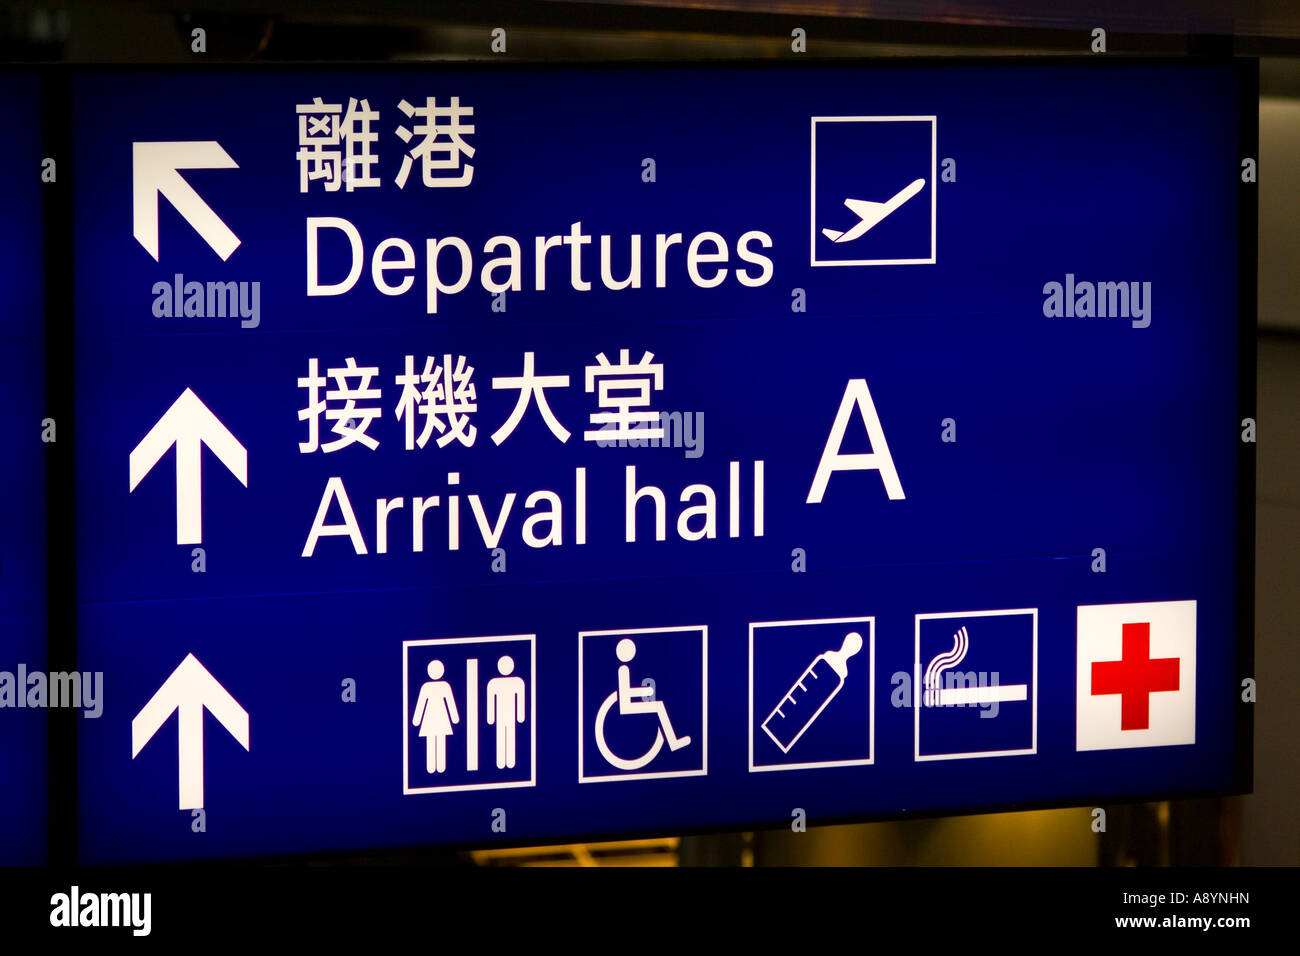 Arrival and Departures Hall, HKG, Hong Kong International Airport Sign Stock Photo